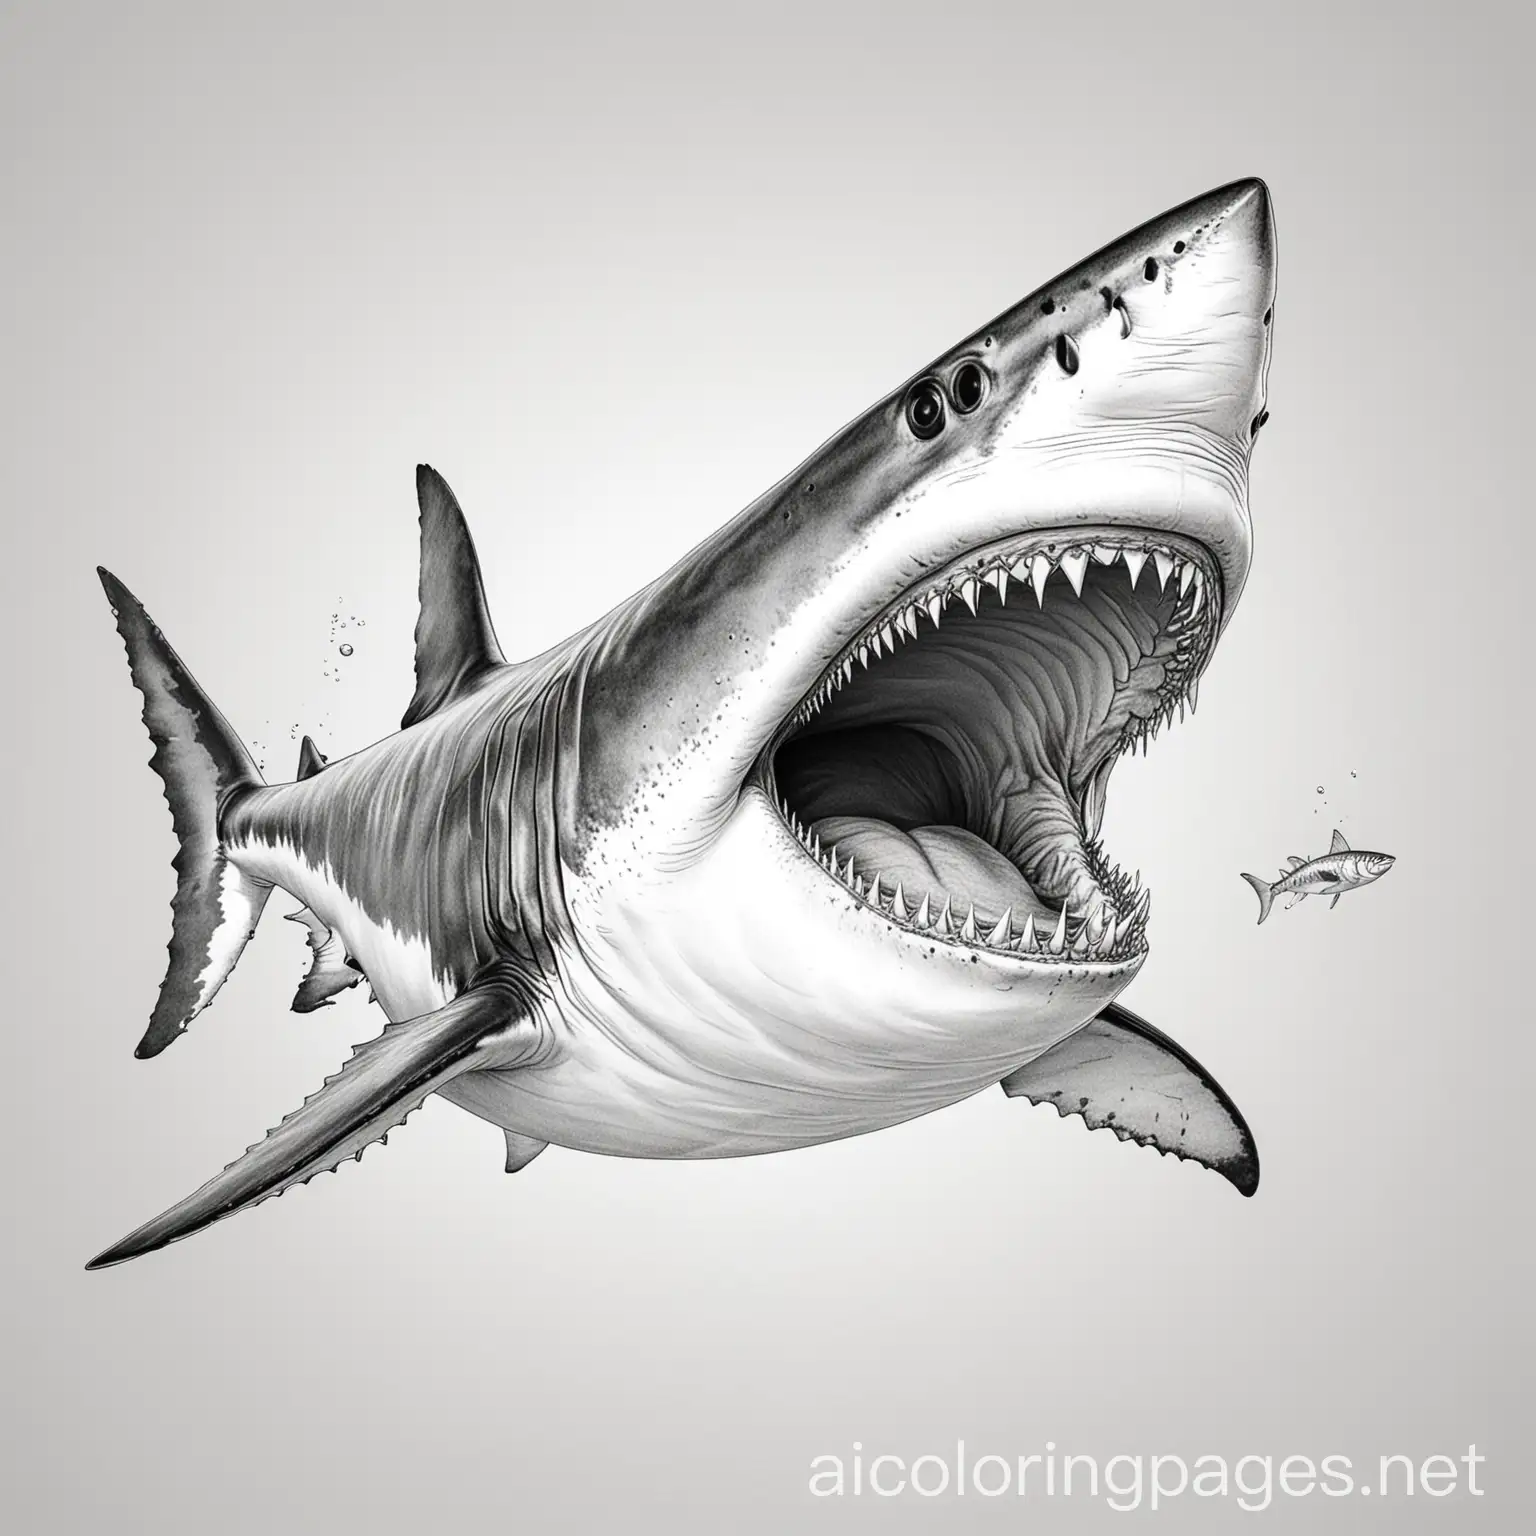 great white shark open mouth with one small fish that does not look like shark near it. the fish is just swimming on top of the shark, Coloring Page, black and white, line art, white background, Simplicity, Ample White Space. The background of the coloring page is plain white to make it easy for young children to color within the lines. The outlines of all the subjects are easy to distinguish, making it simple for kids to color without too much difficulty